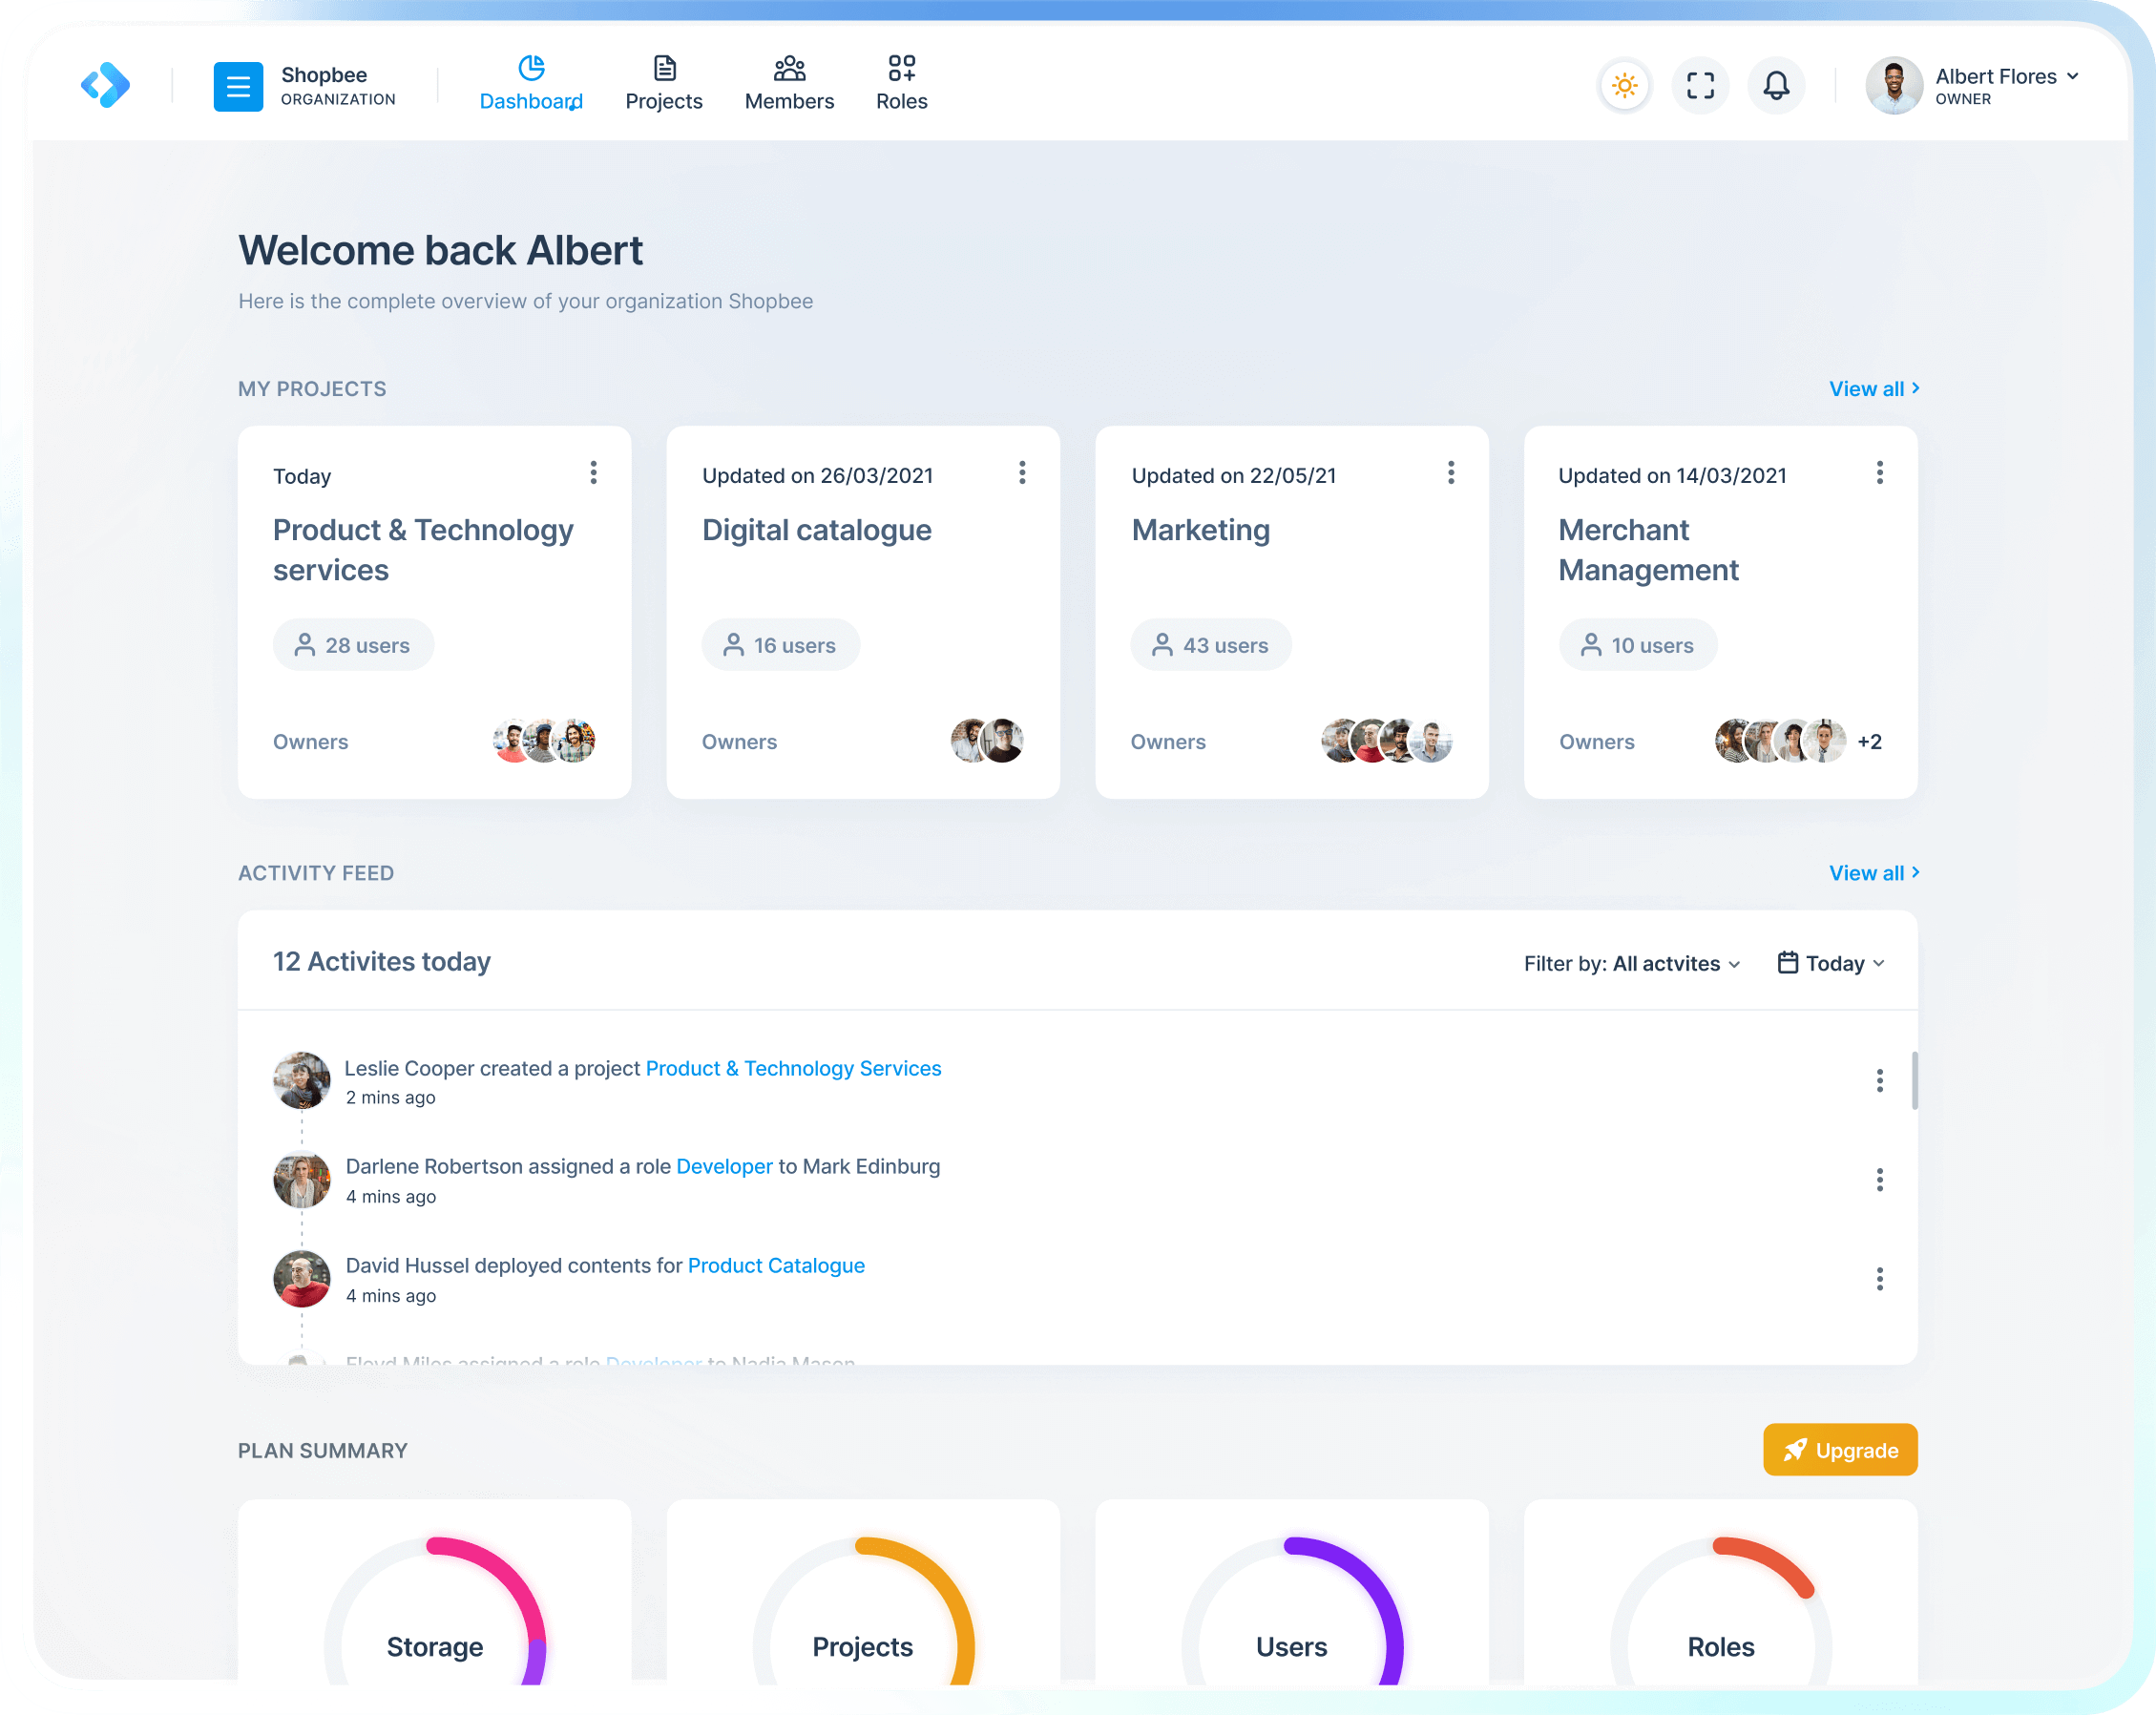 A dashboard that quickly gives you insights into your organization